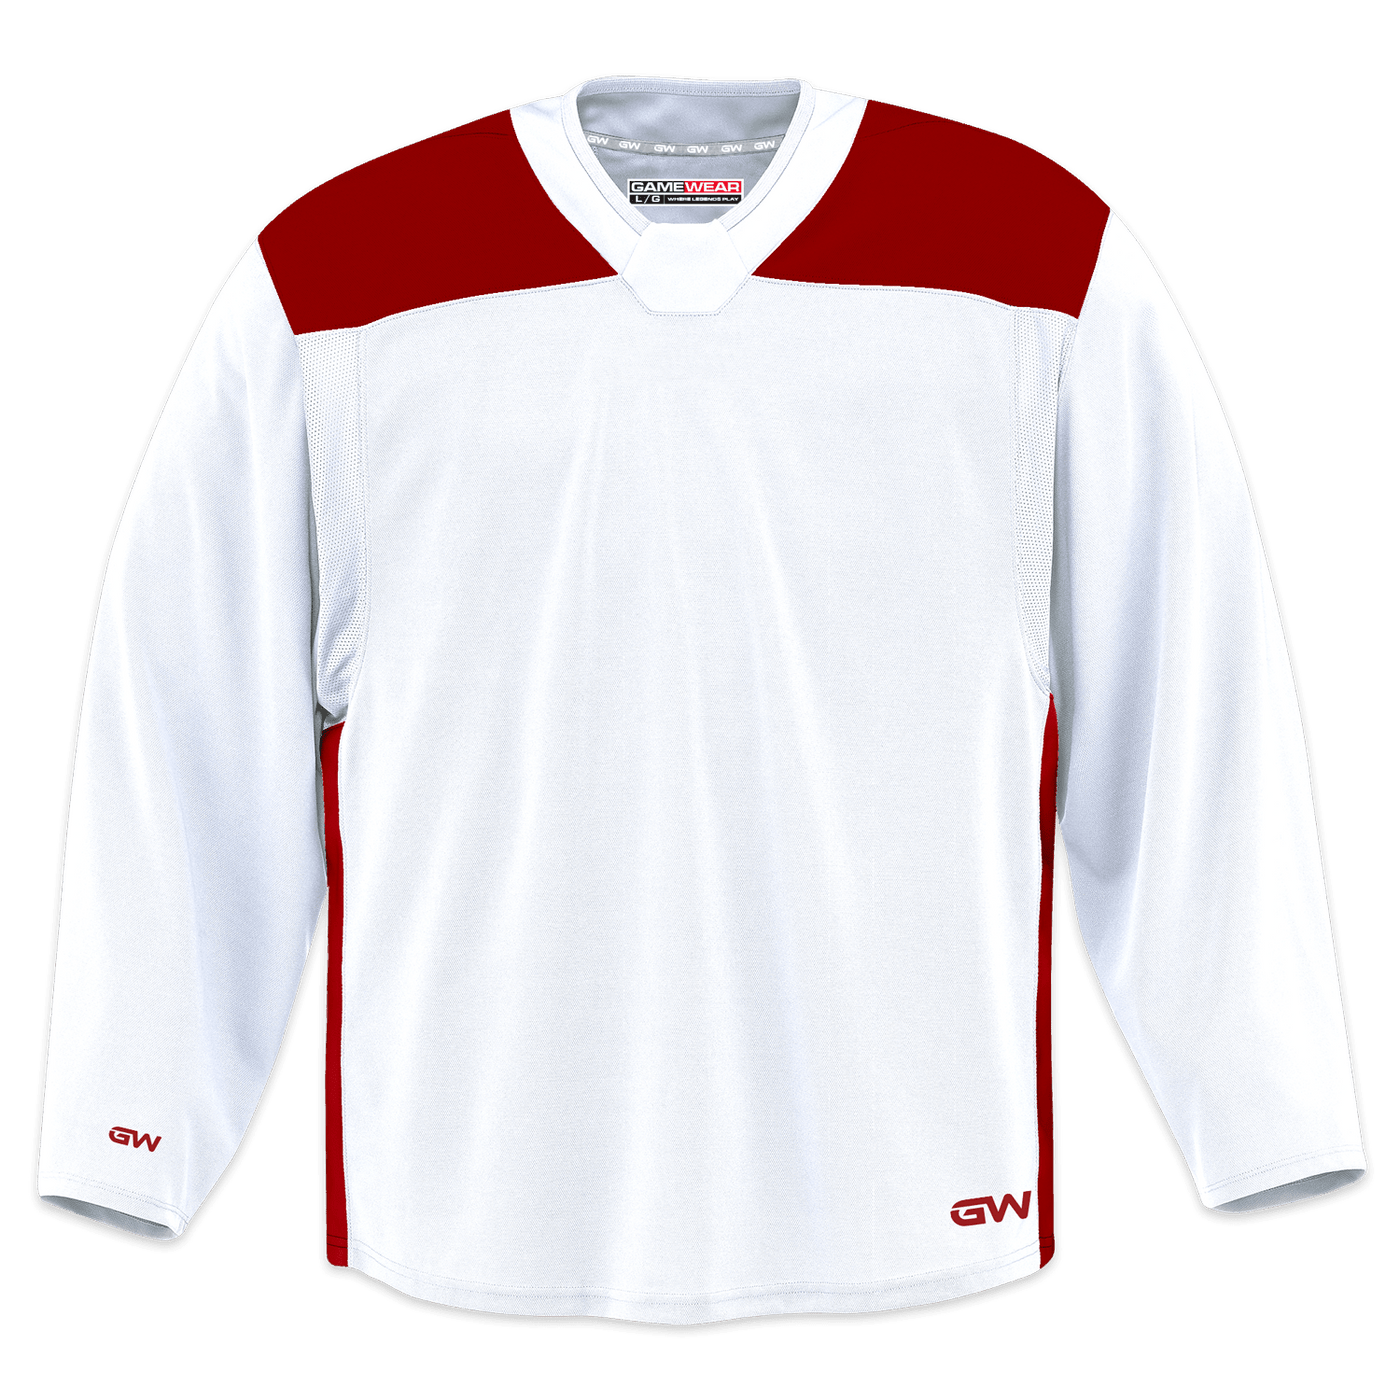 GameWear GW6500 ProLite Series Junior Hockey Practice Jersey - White / Red - The Hockey Shop Source For Sports